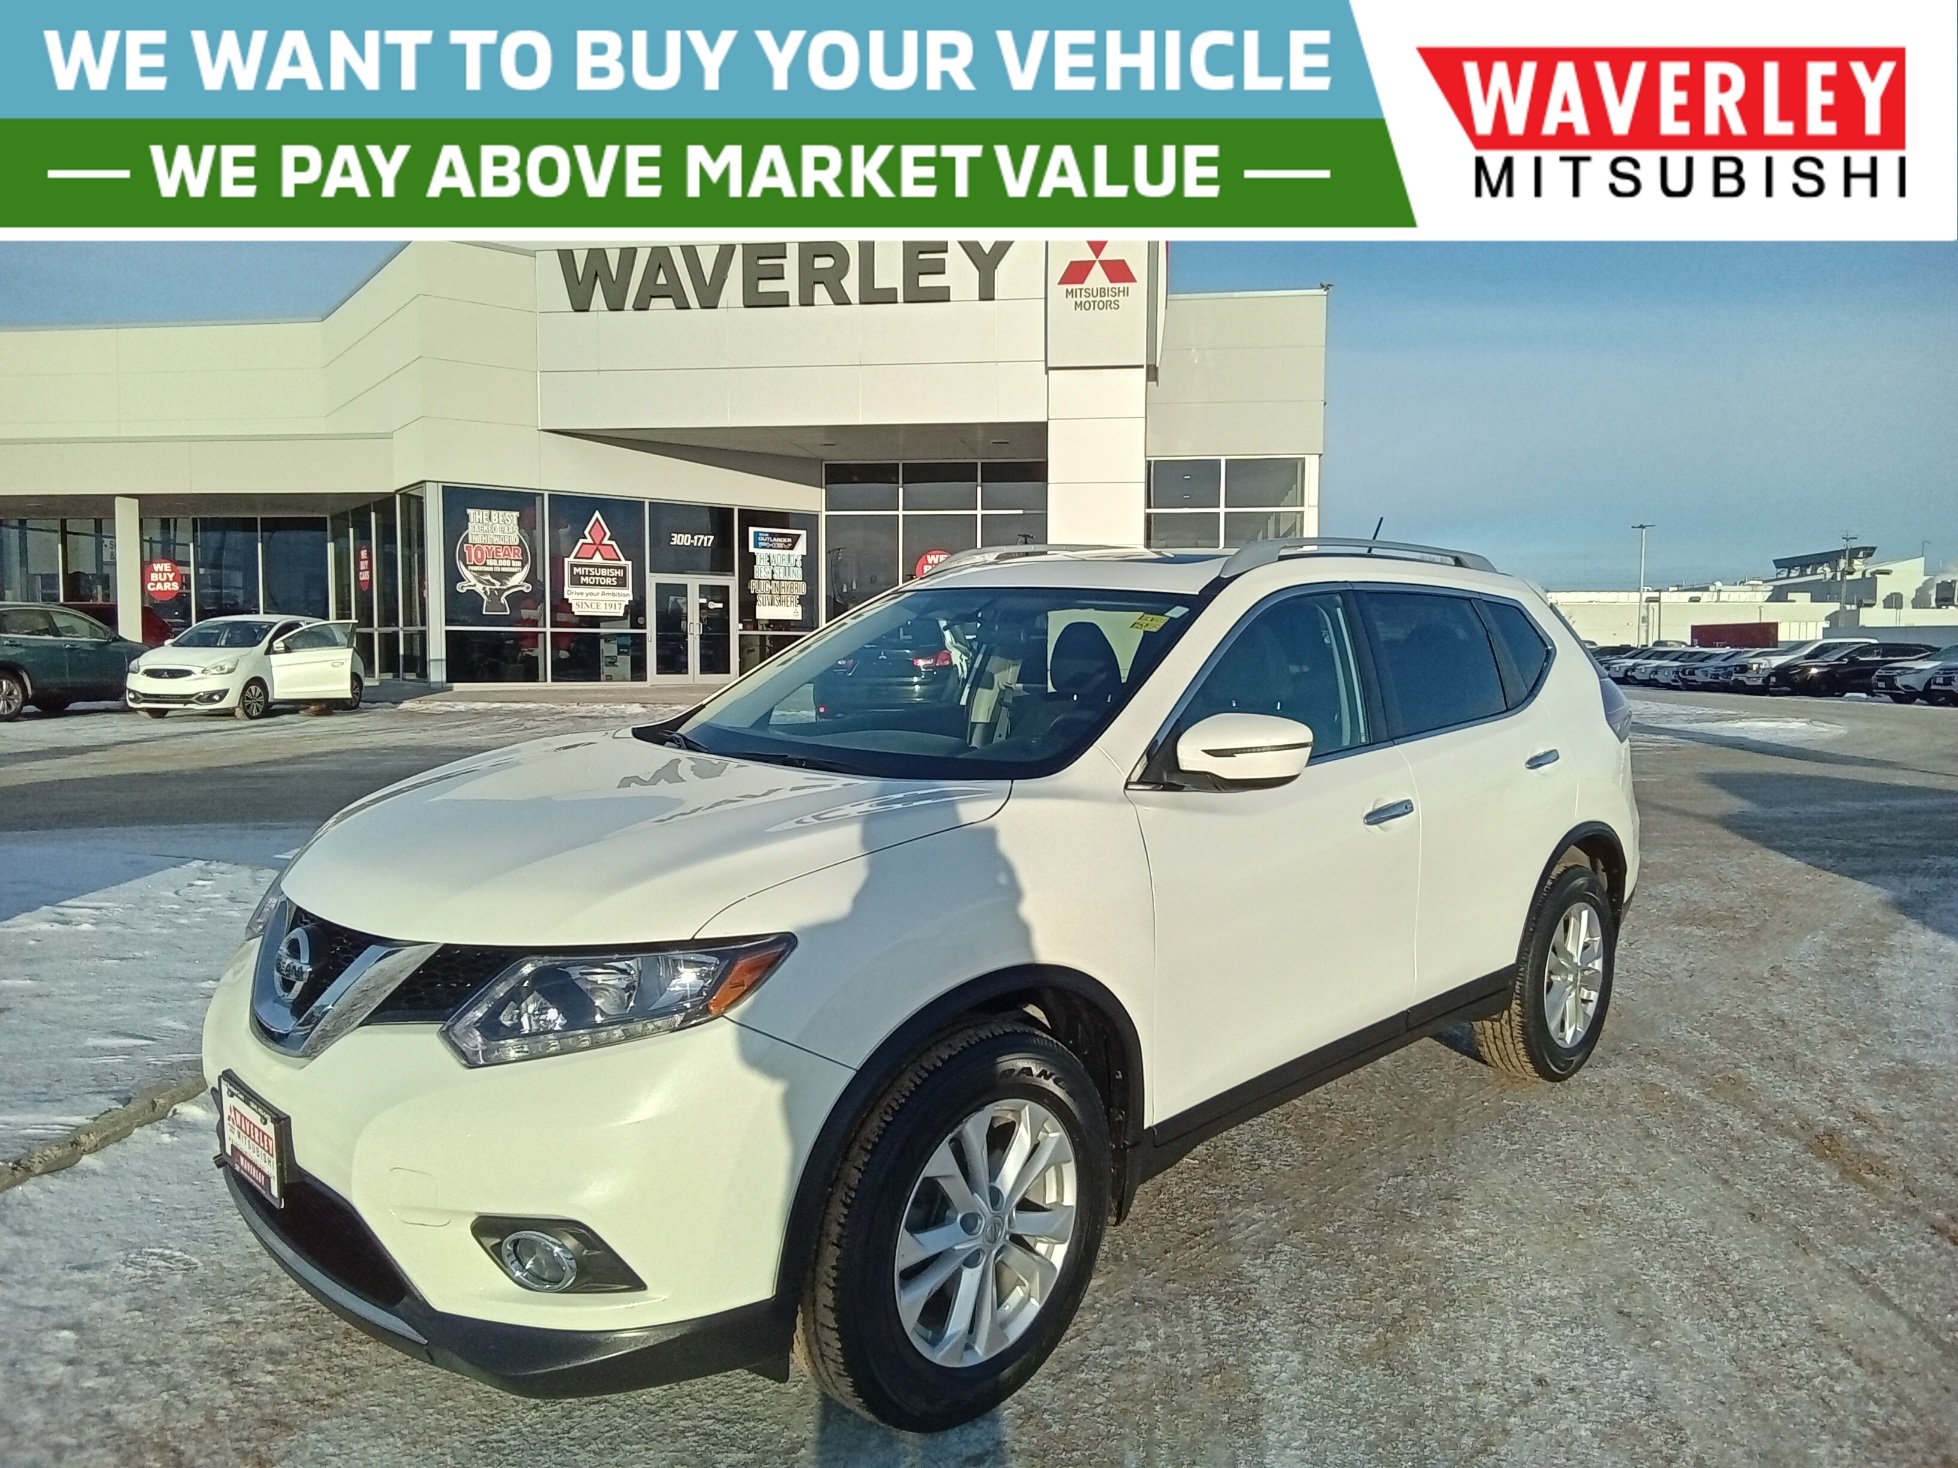 2016 Nissan Rogue SV AWD | Local Trade | Low Kms | SUV